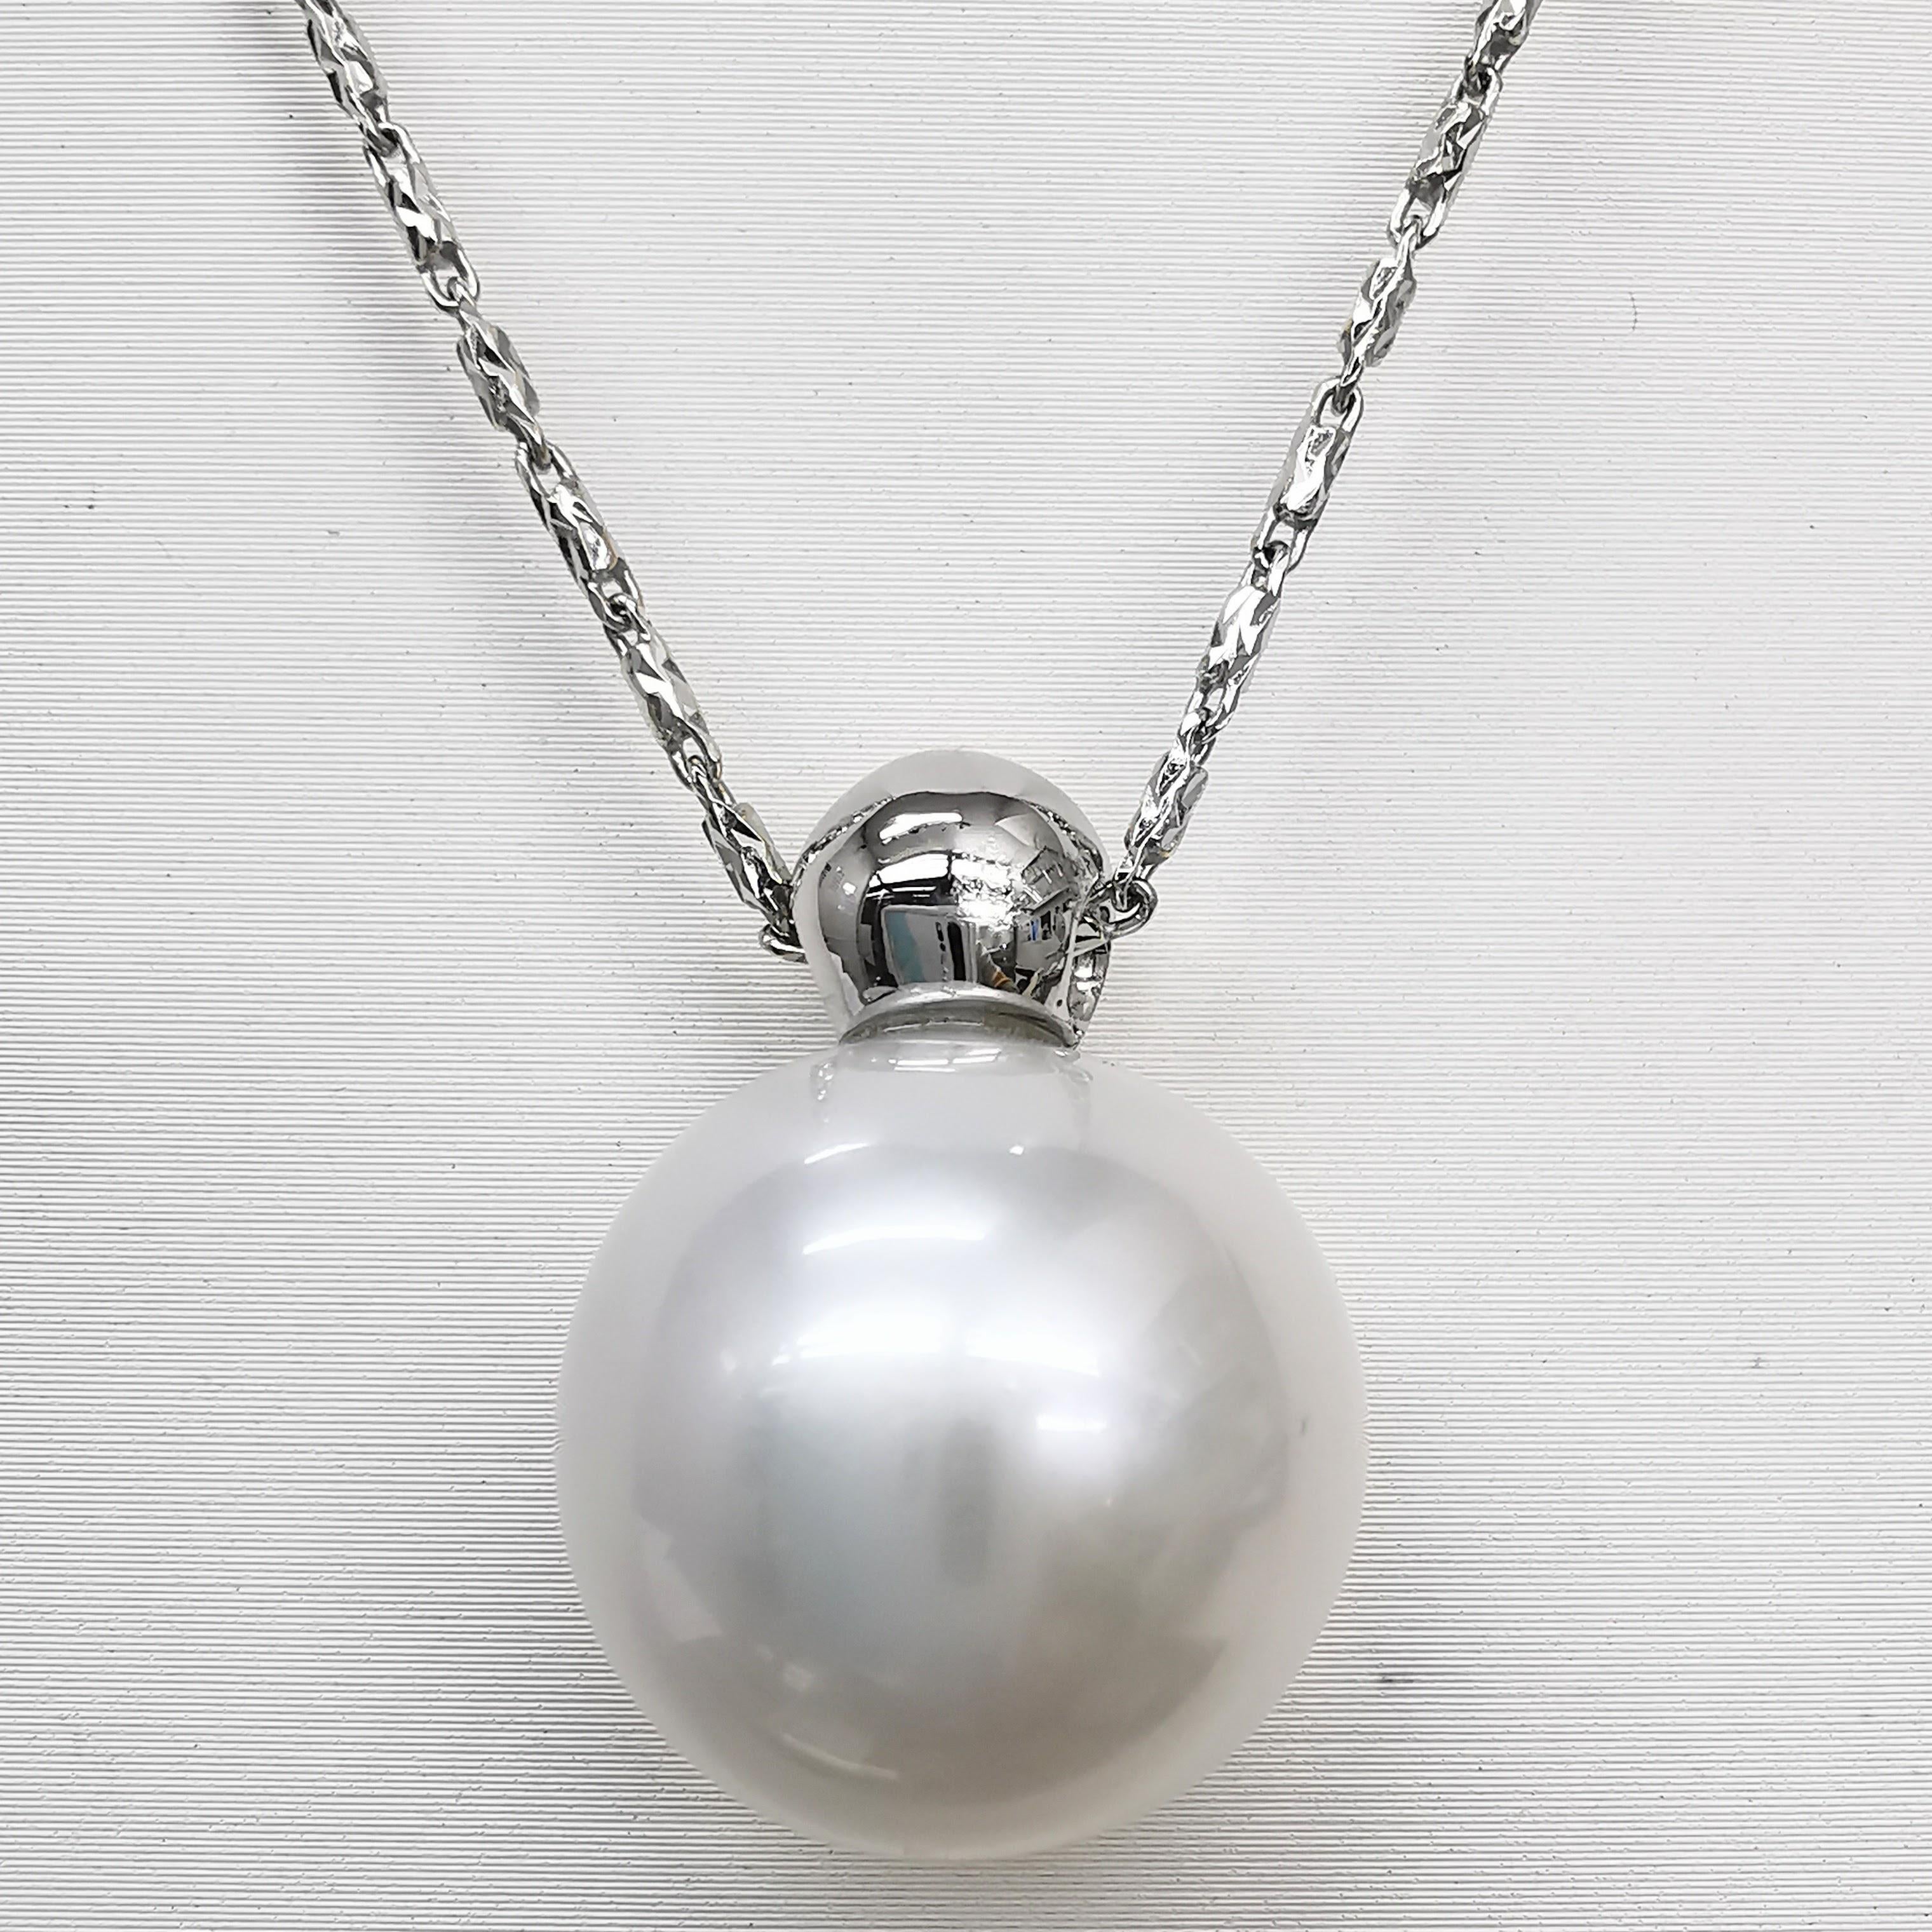 Introduce our beautiful 16.5mm South Sea Pearl Pendant, crafted in 18K white gold. This pendant features a 16.5mm bright white South Sea cultured pearl, known for its high luster, large size and cool white, near silver color. The pearl is